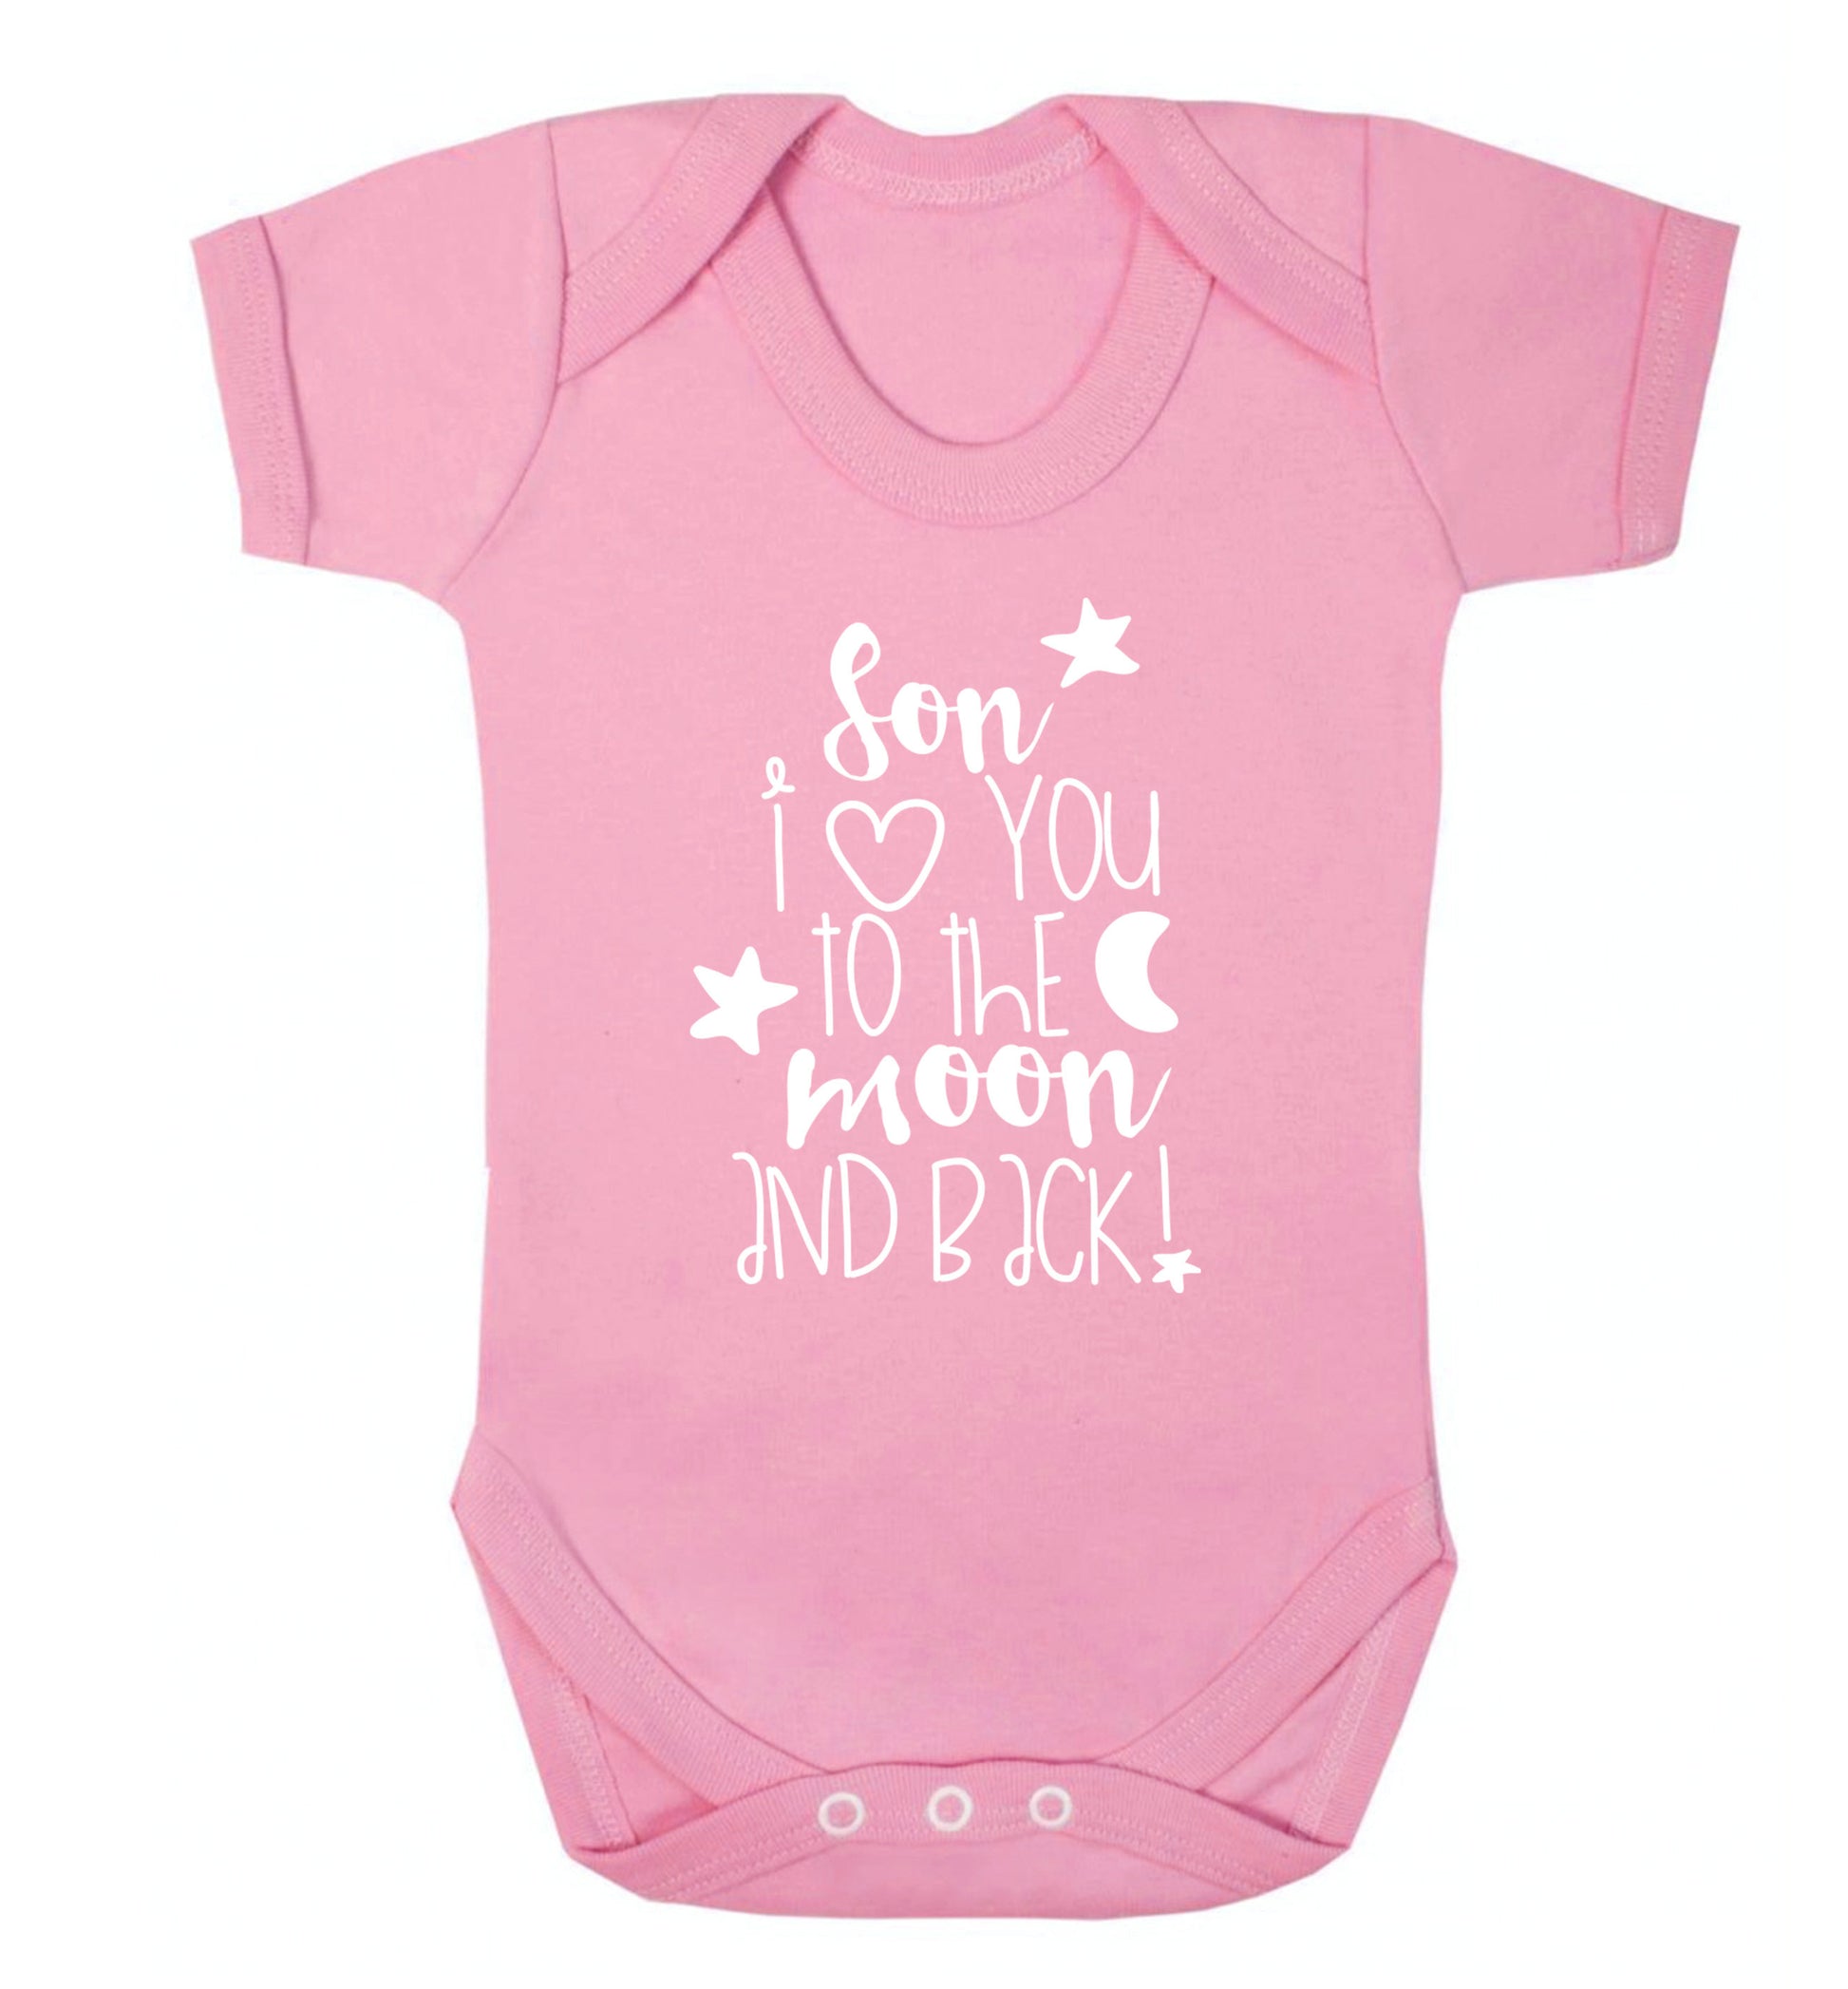 Son I love you to the moon and back Baby Vest pale pink 18-24 months